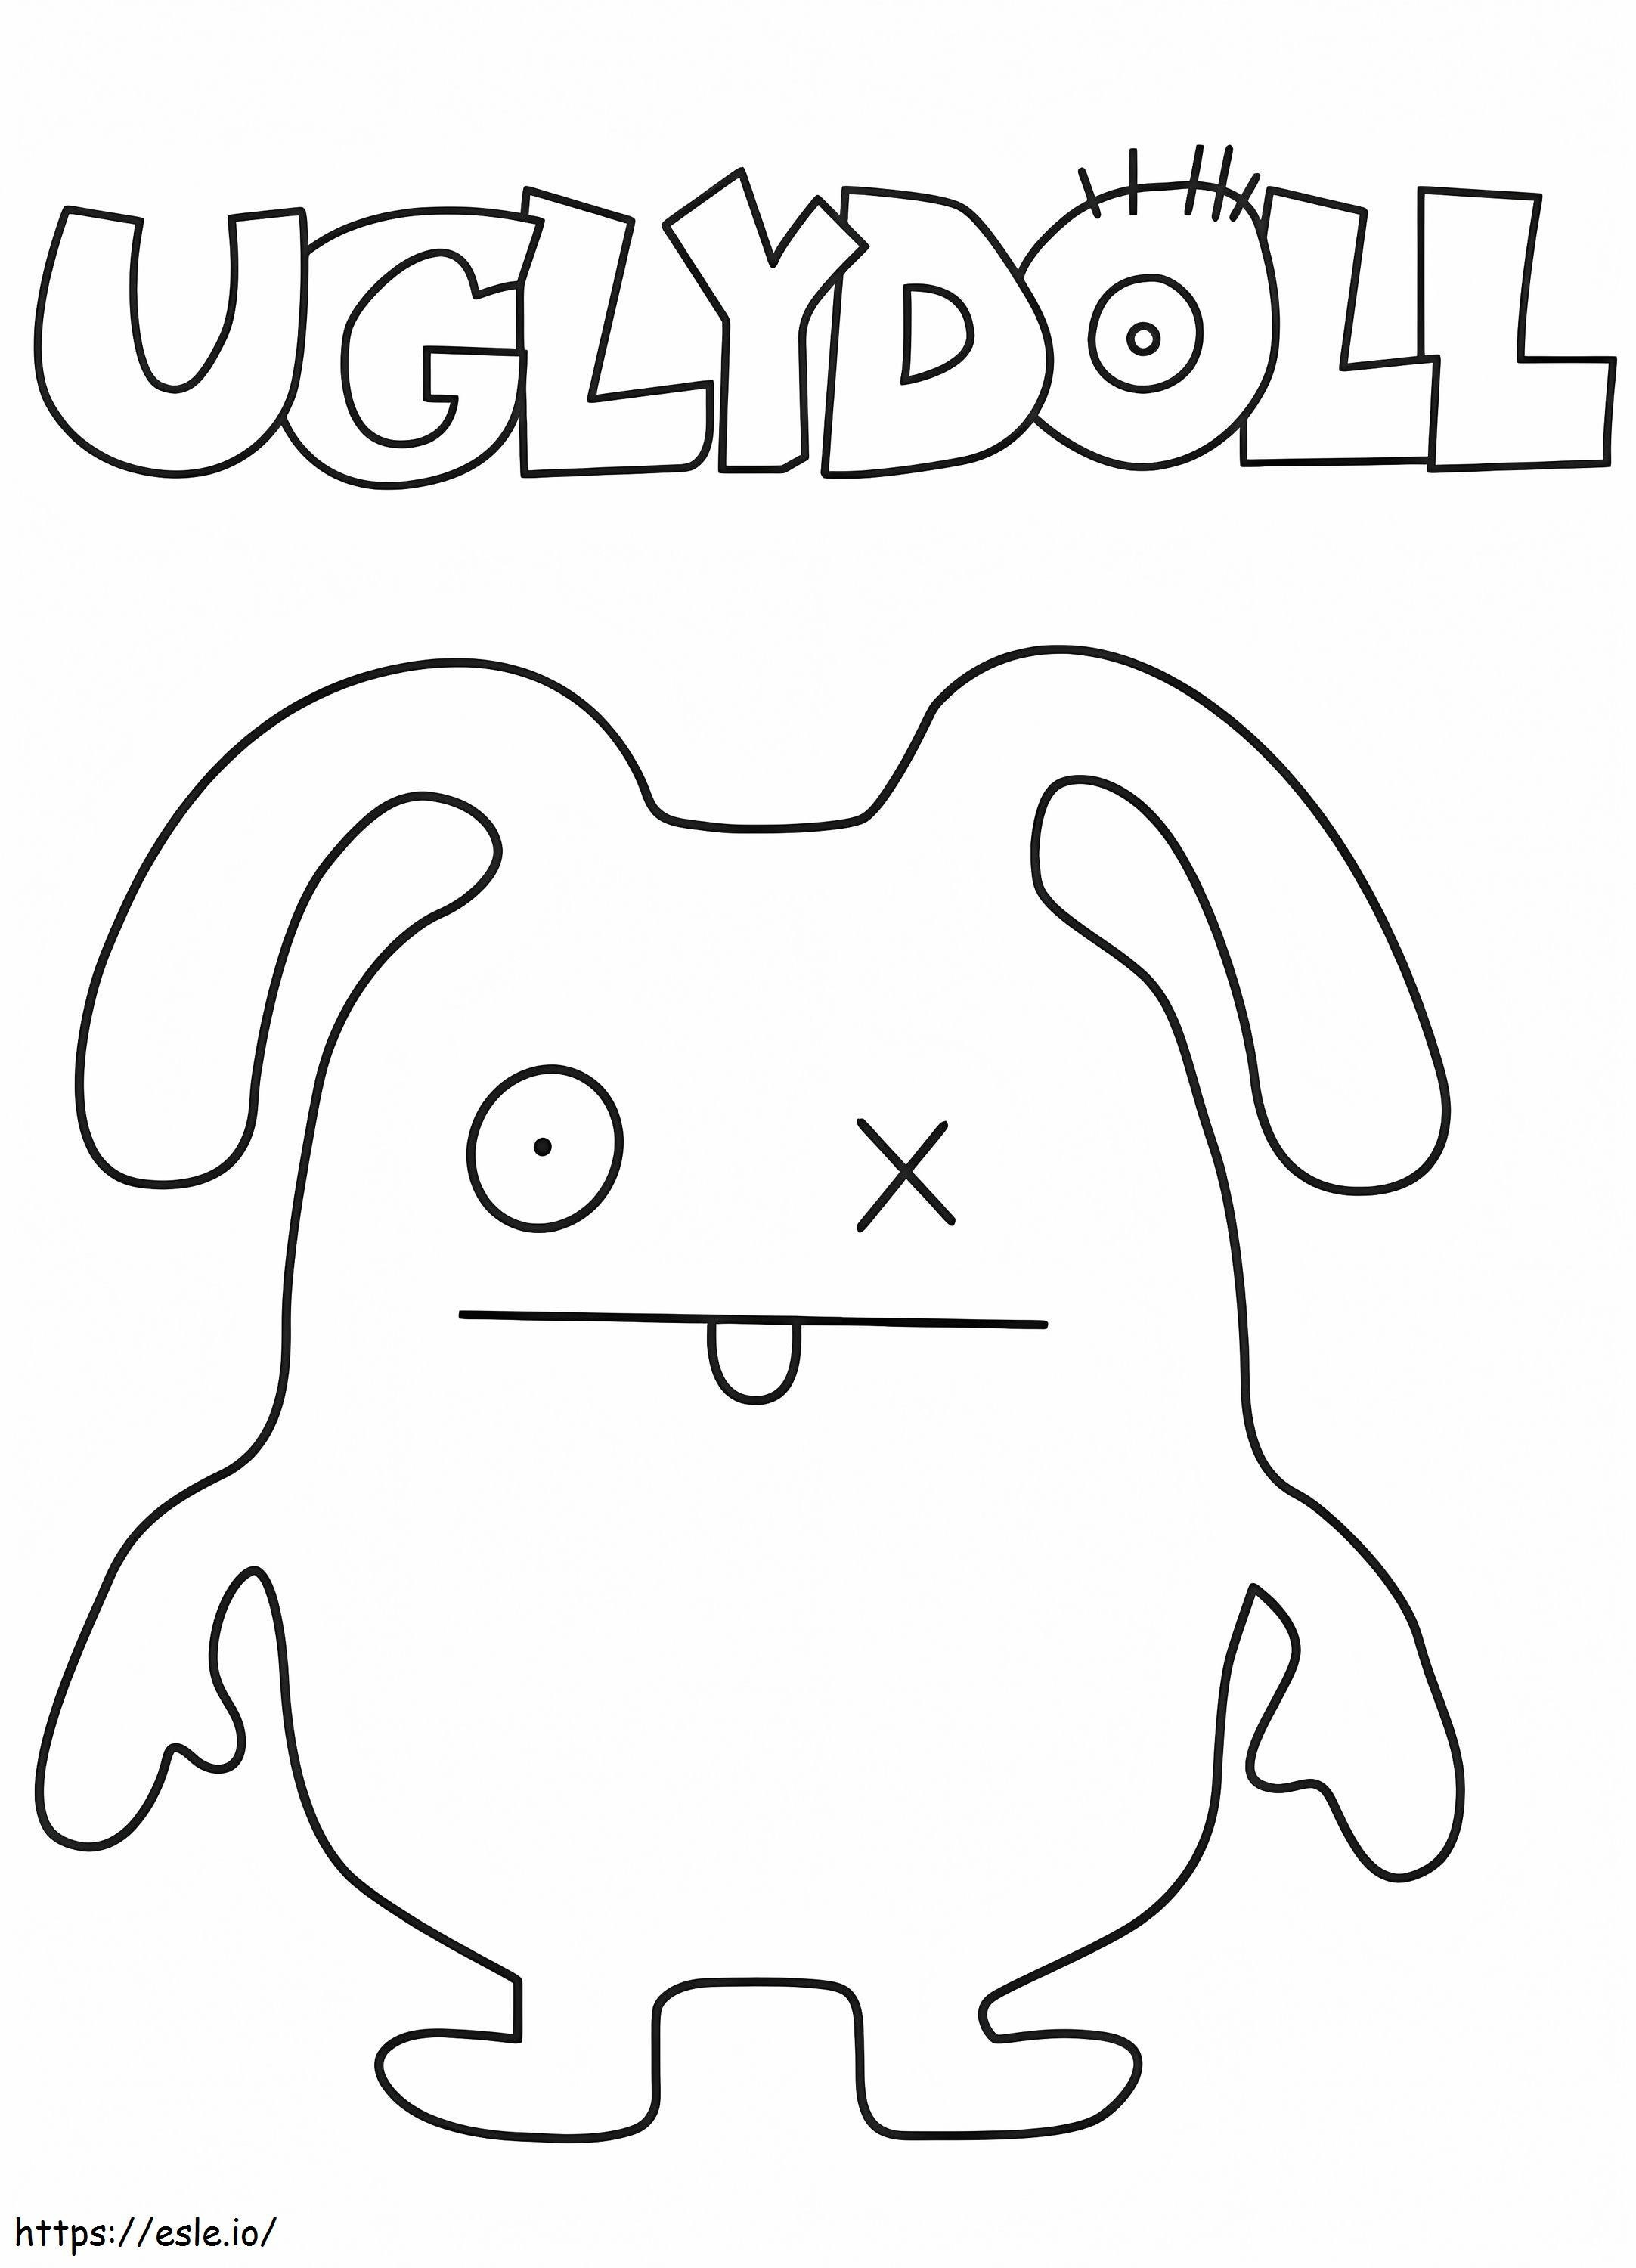 UglyDolls Ox coloring page